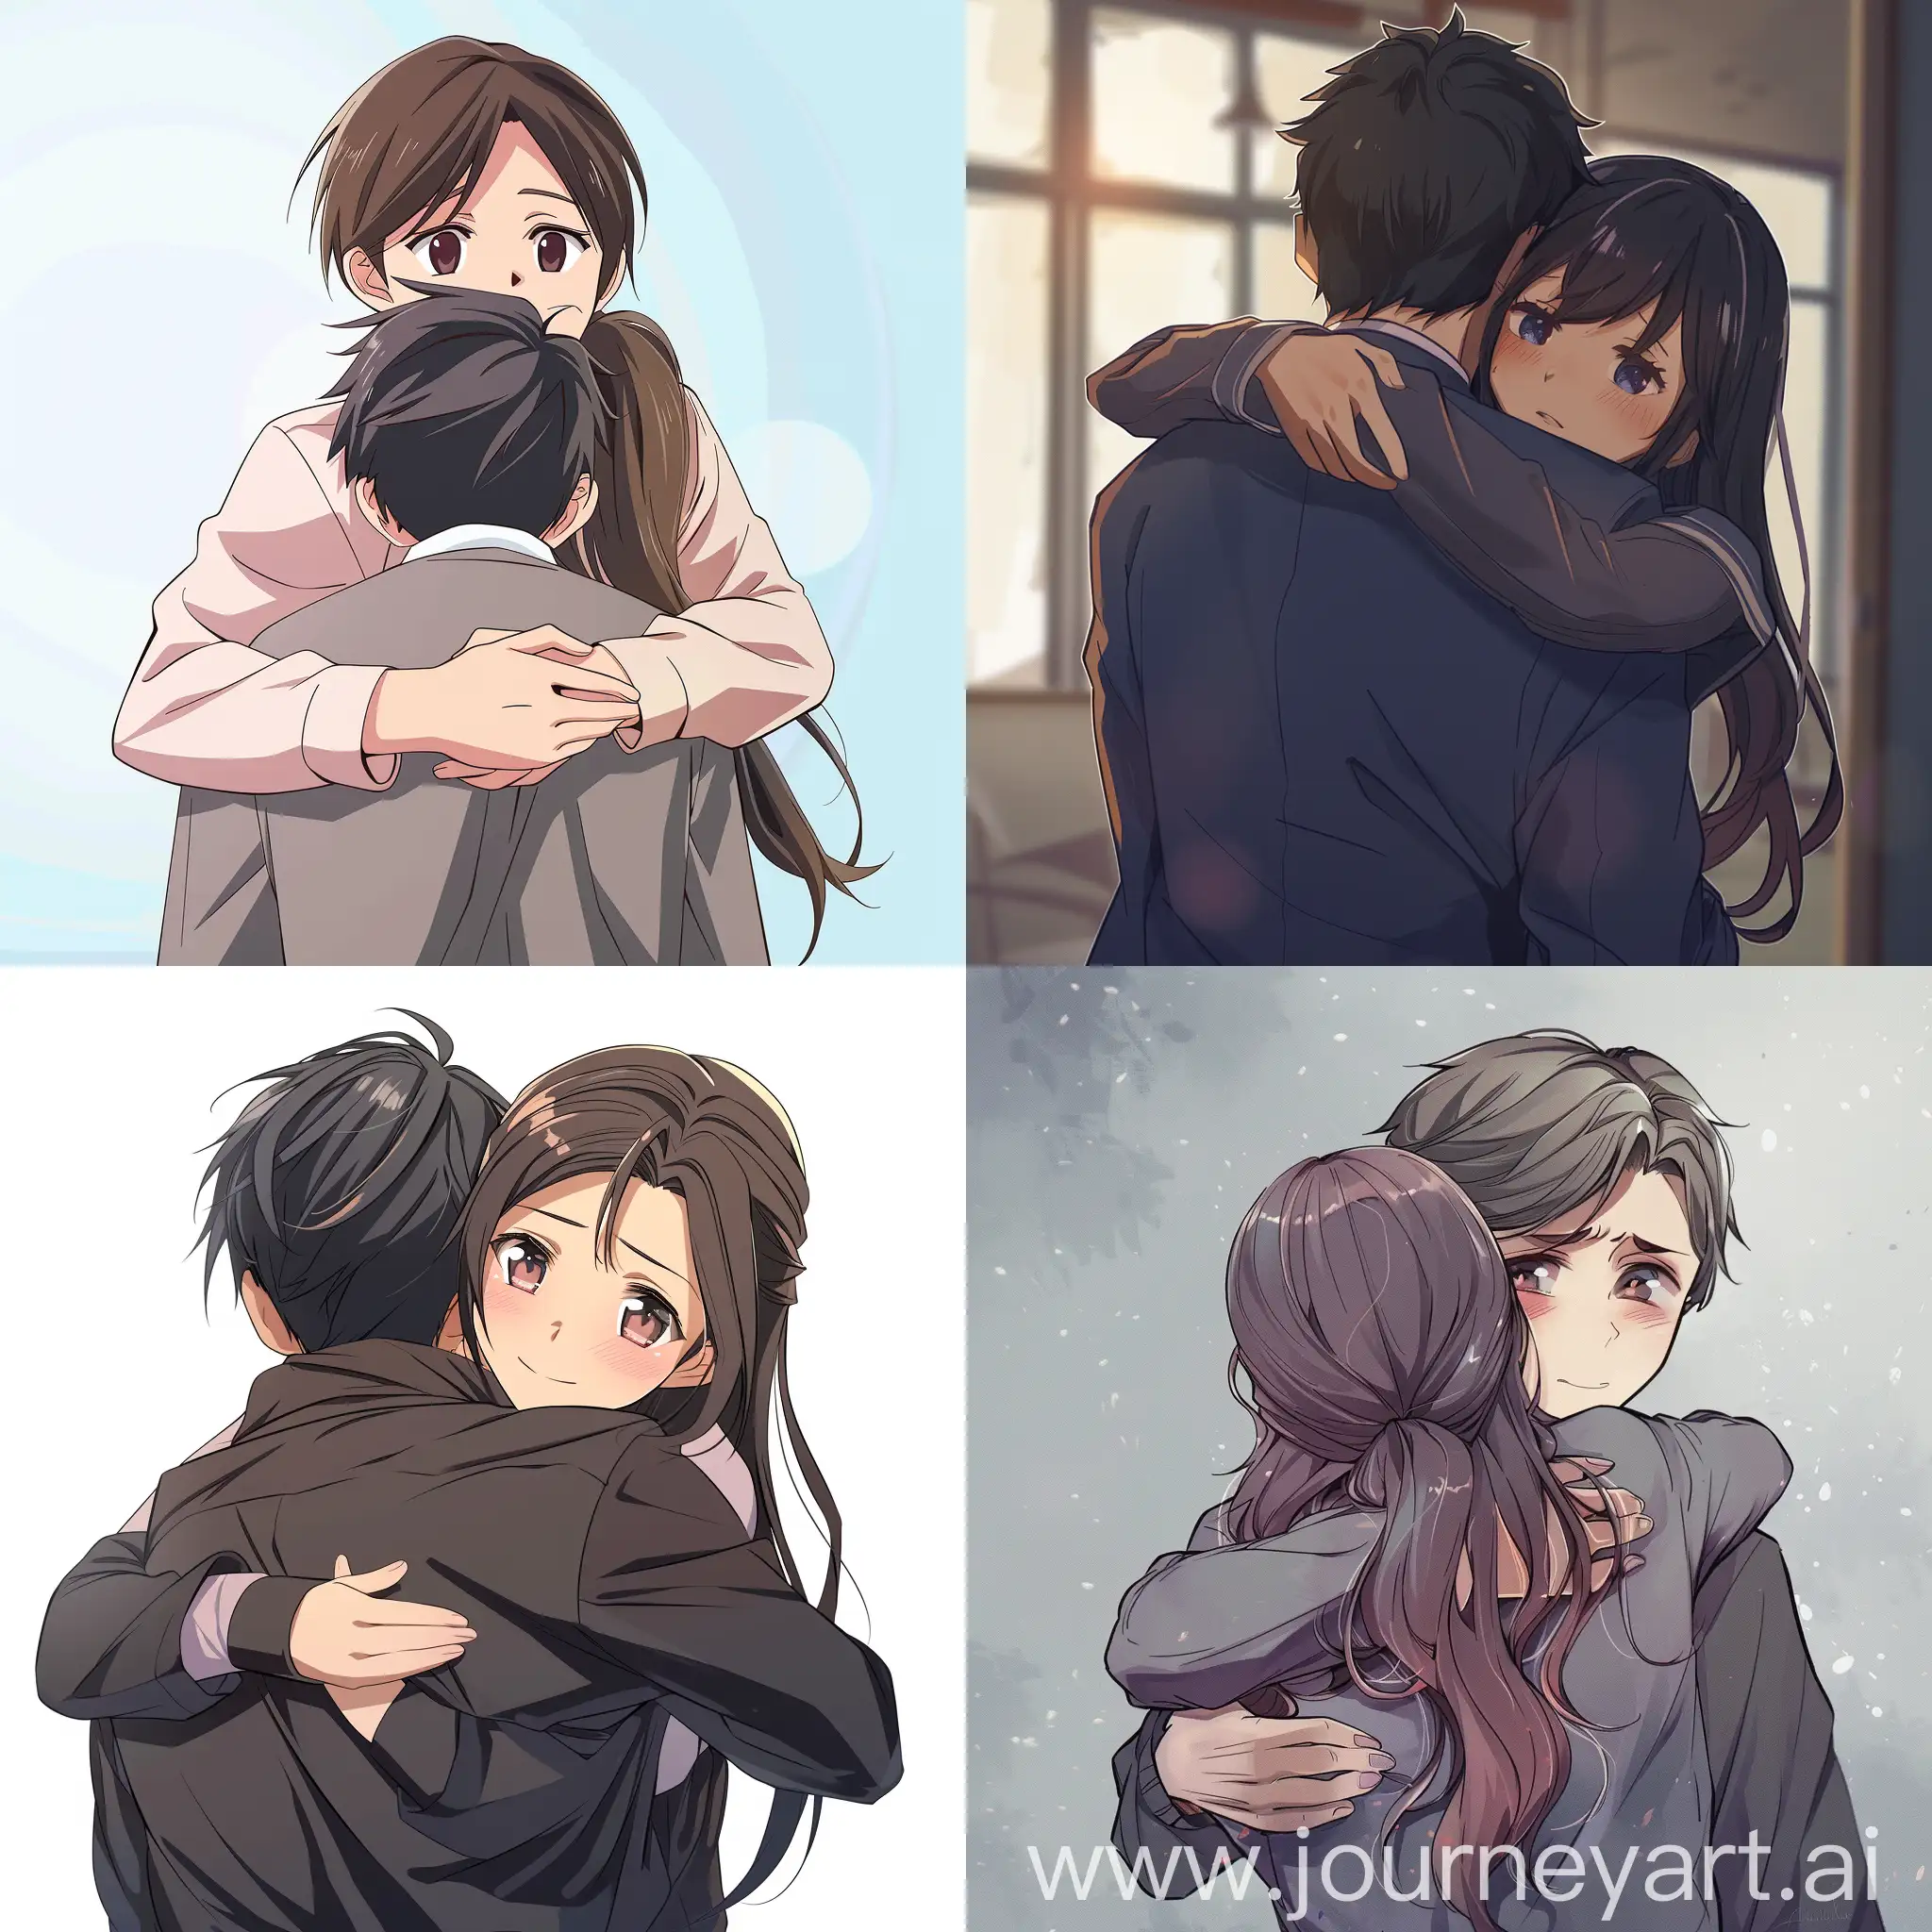 Anime woman hugging man from behind